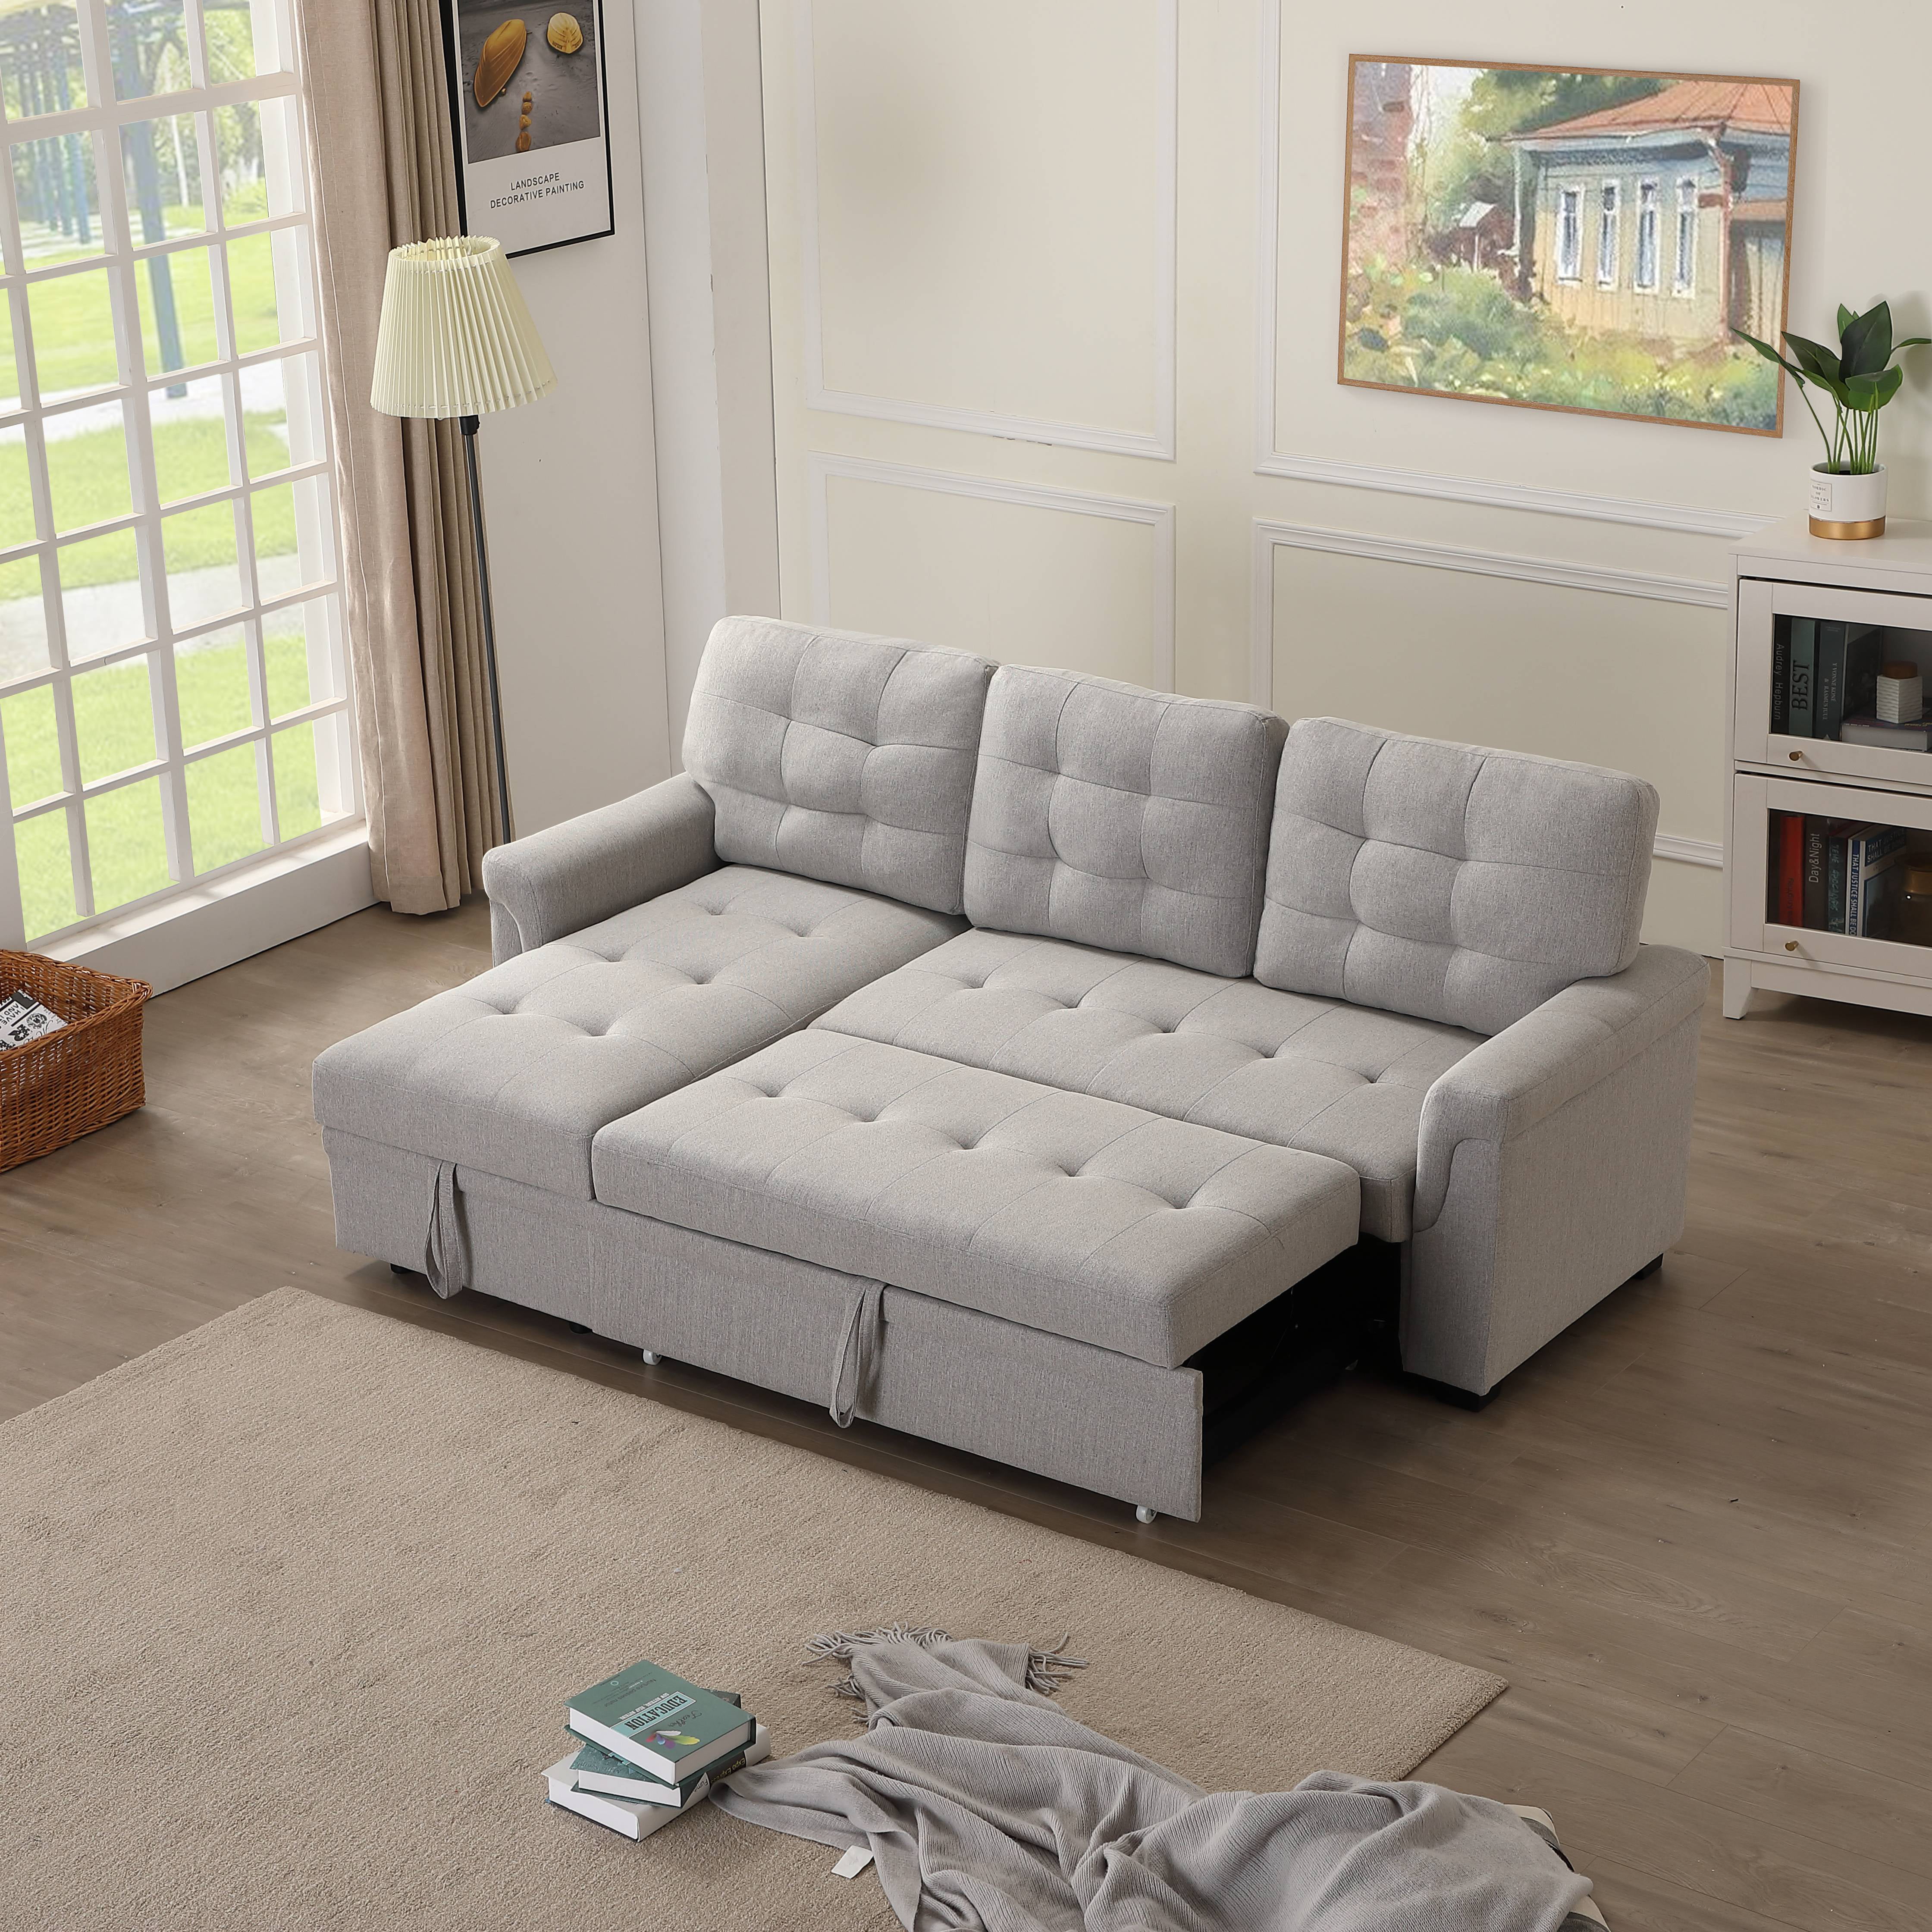 Sofa Bed with Storage: Combining Comfort, Style, and Practicality in One Furniture Piece